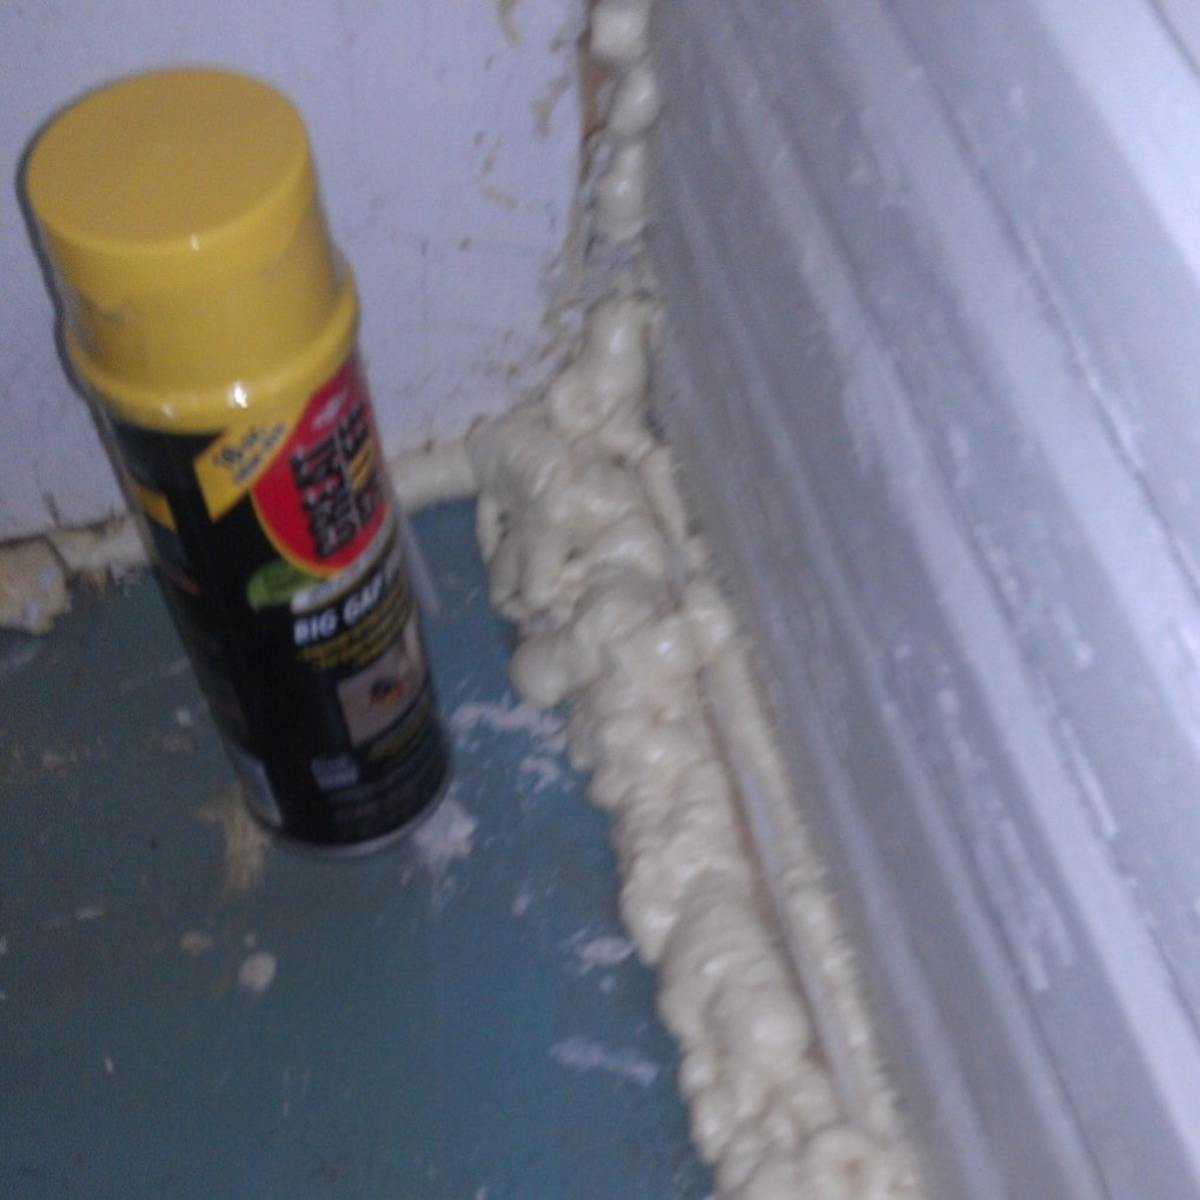 While messier than caulk, you can weatherize and seal expanding spray foam.